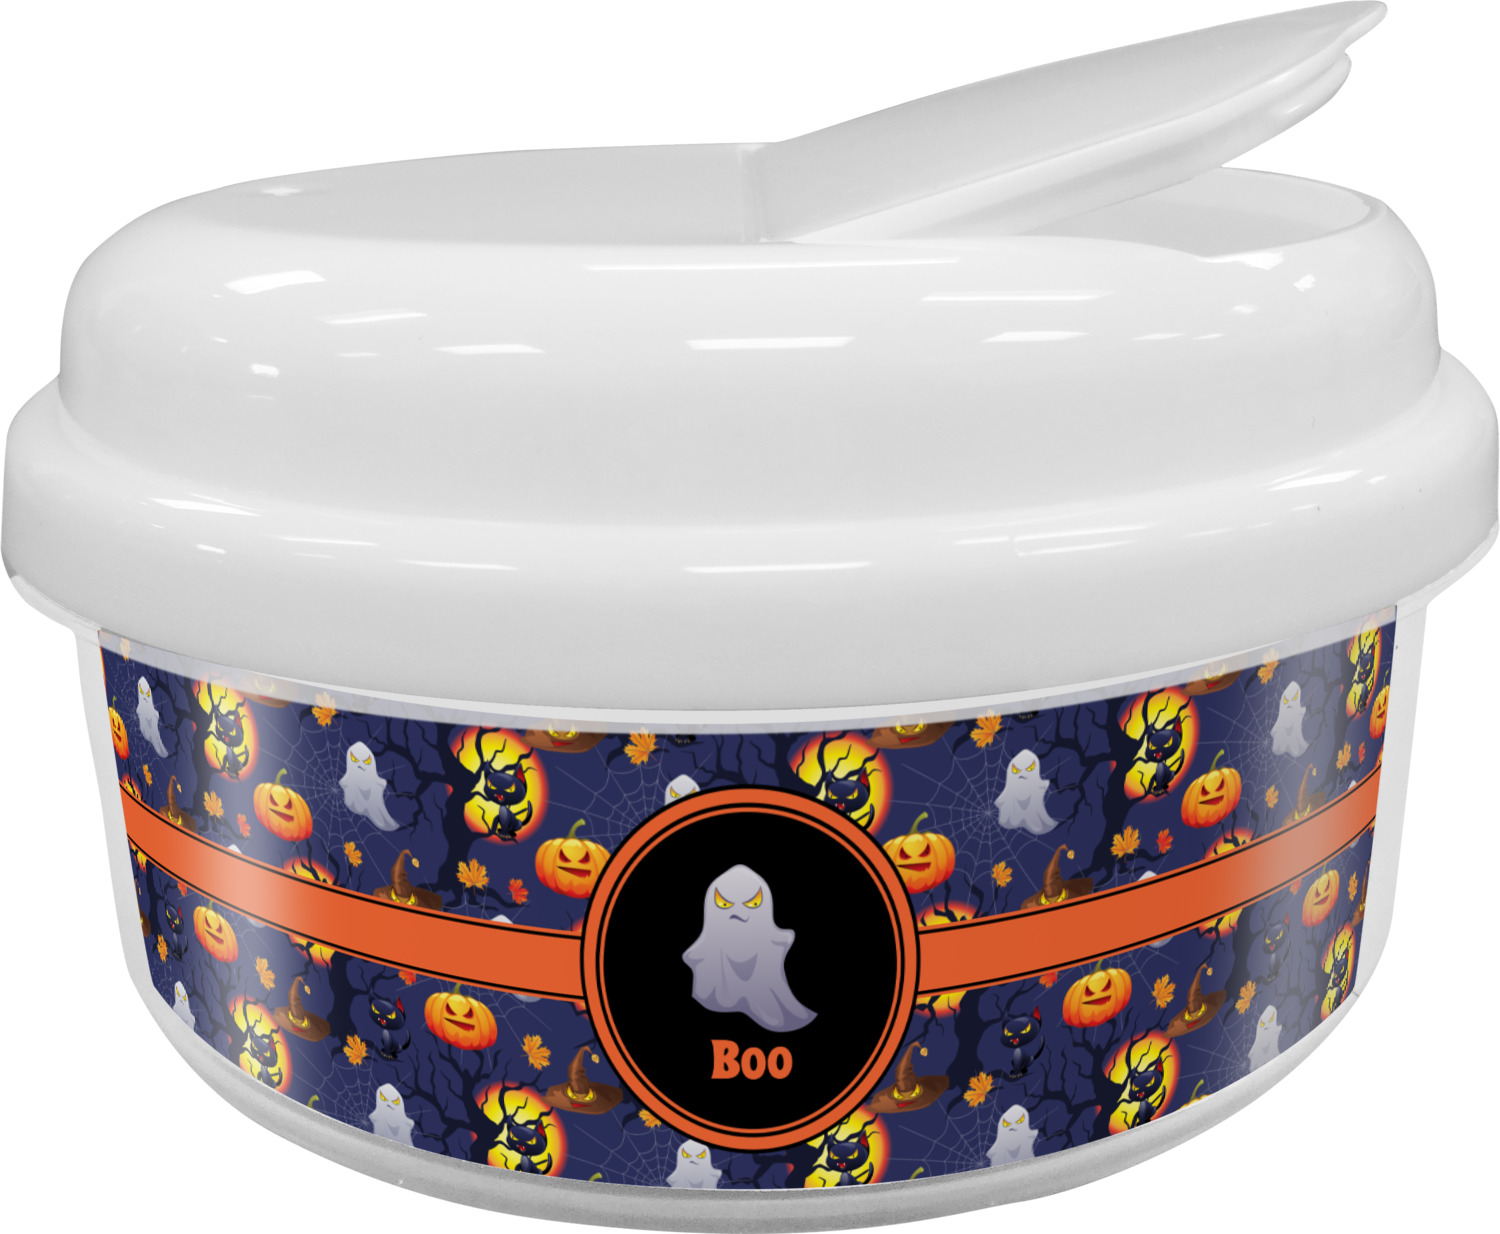 https://www.youcustomizeit.com/common/MAKE/285645/Halloween-Night-Snack-Container-Personalized.jpg?lm=1659776239